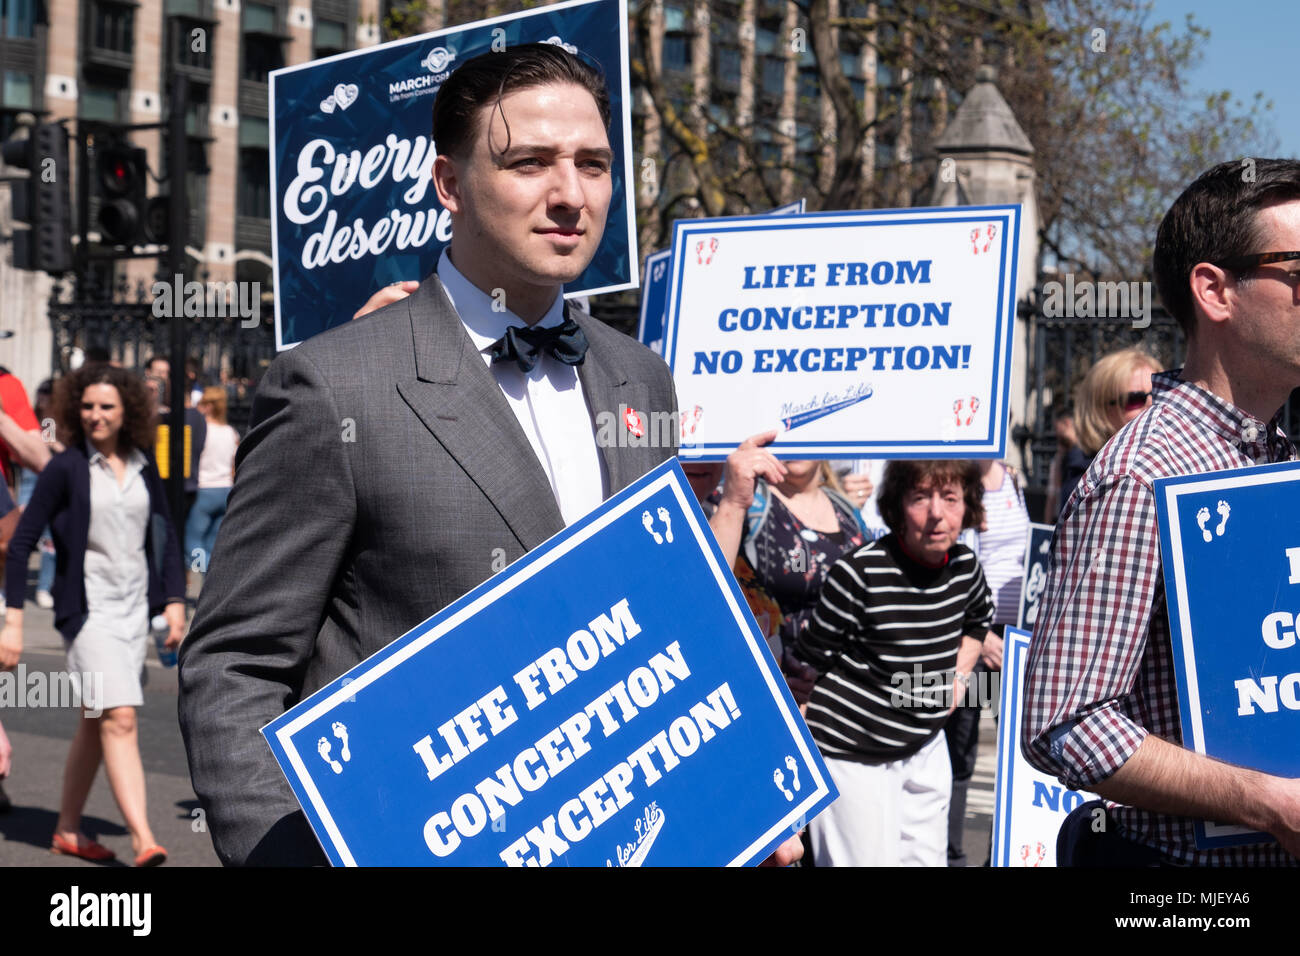 London, UK, 5th May 2018, Members of the March for Life UK held a march through central London. A male holds a 'life from conception no exception' placard Credit: adrian looby/Alamy Live News Stock Photo